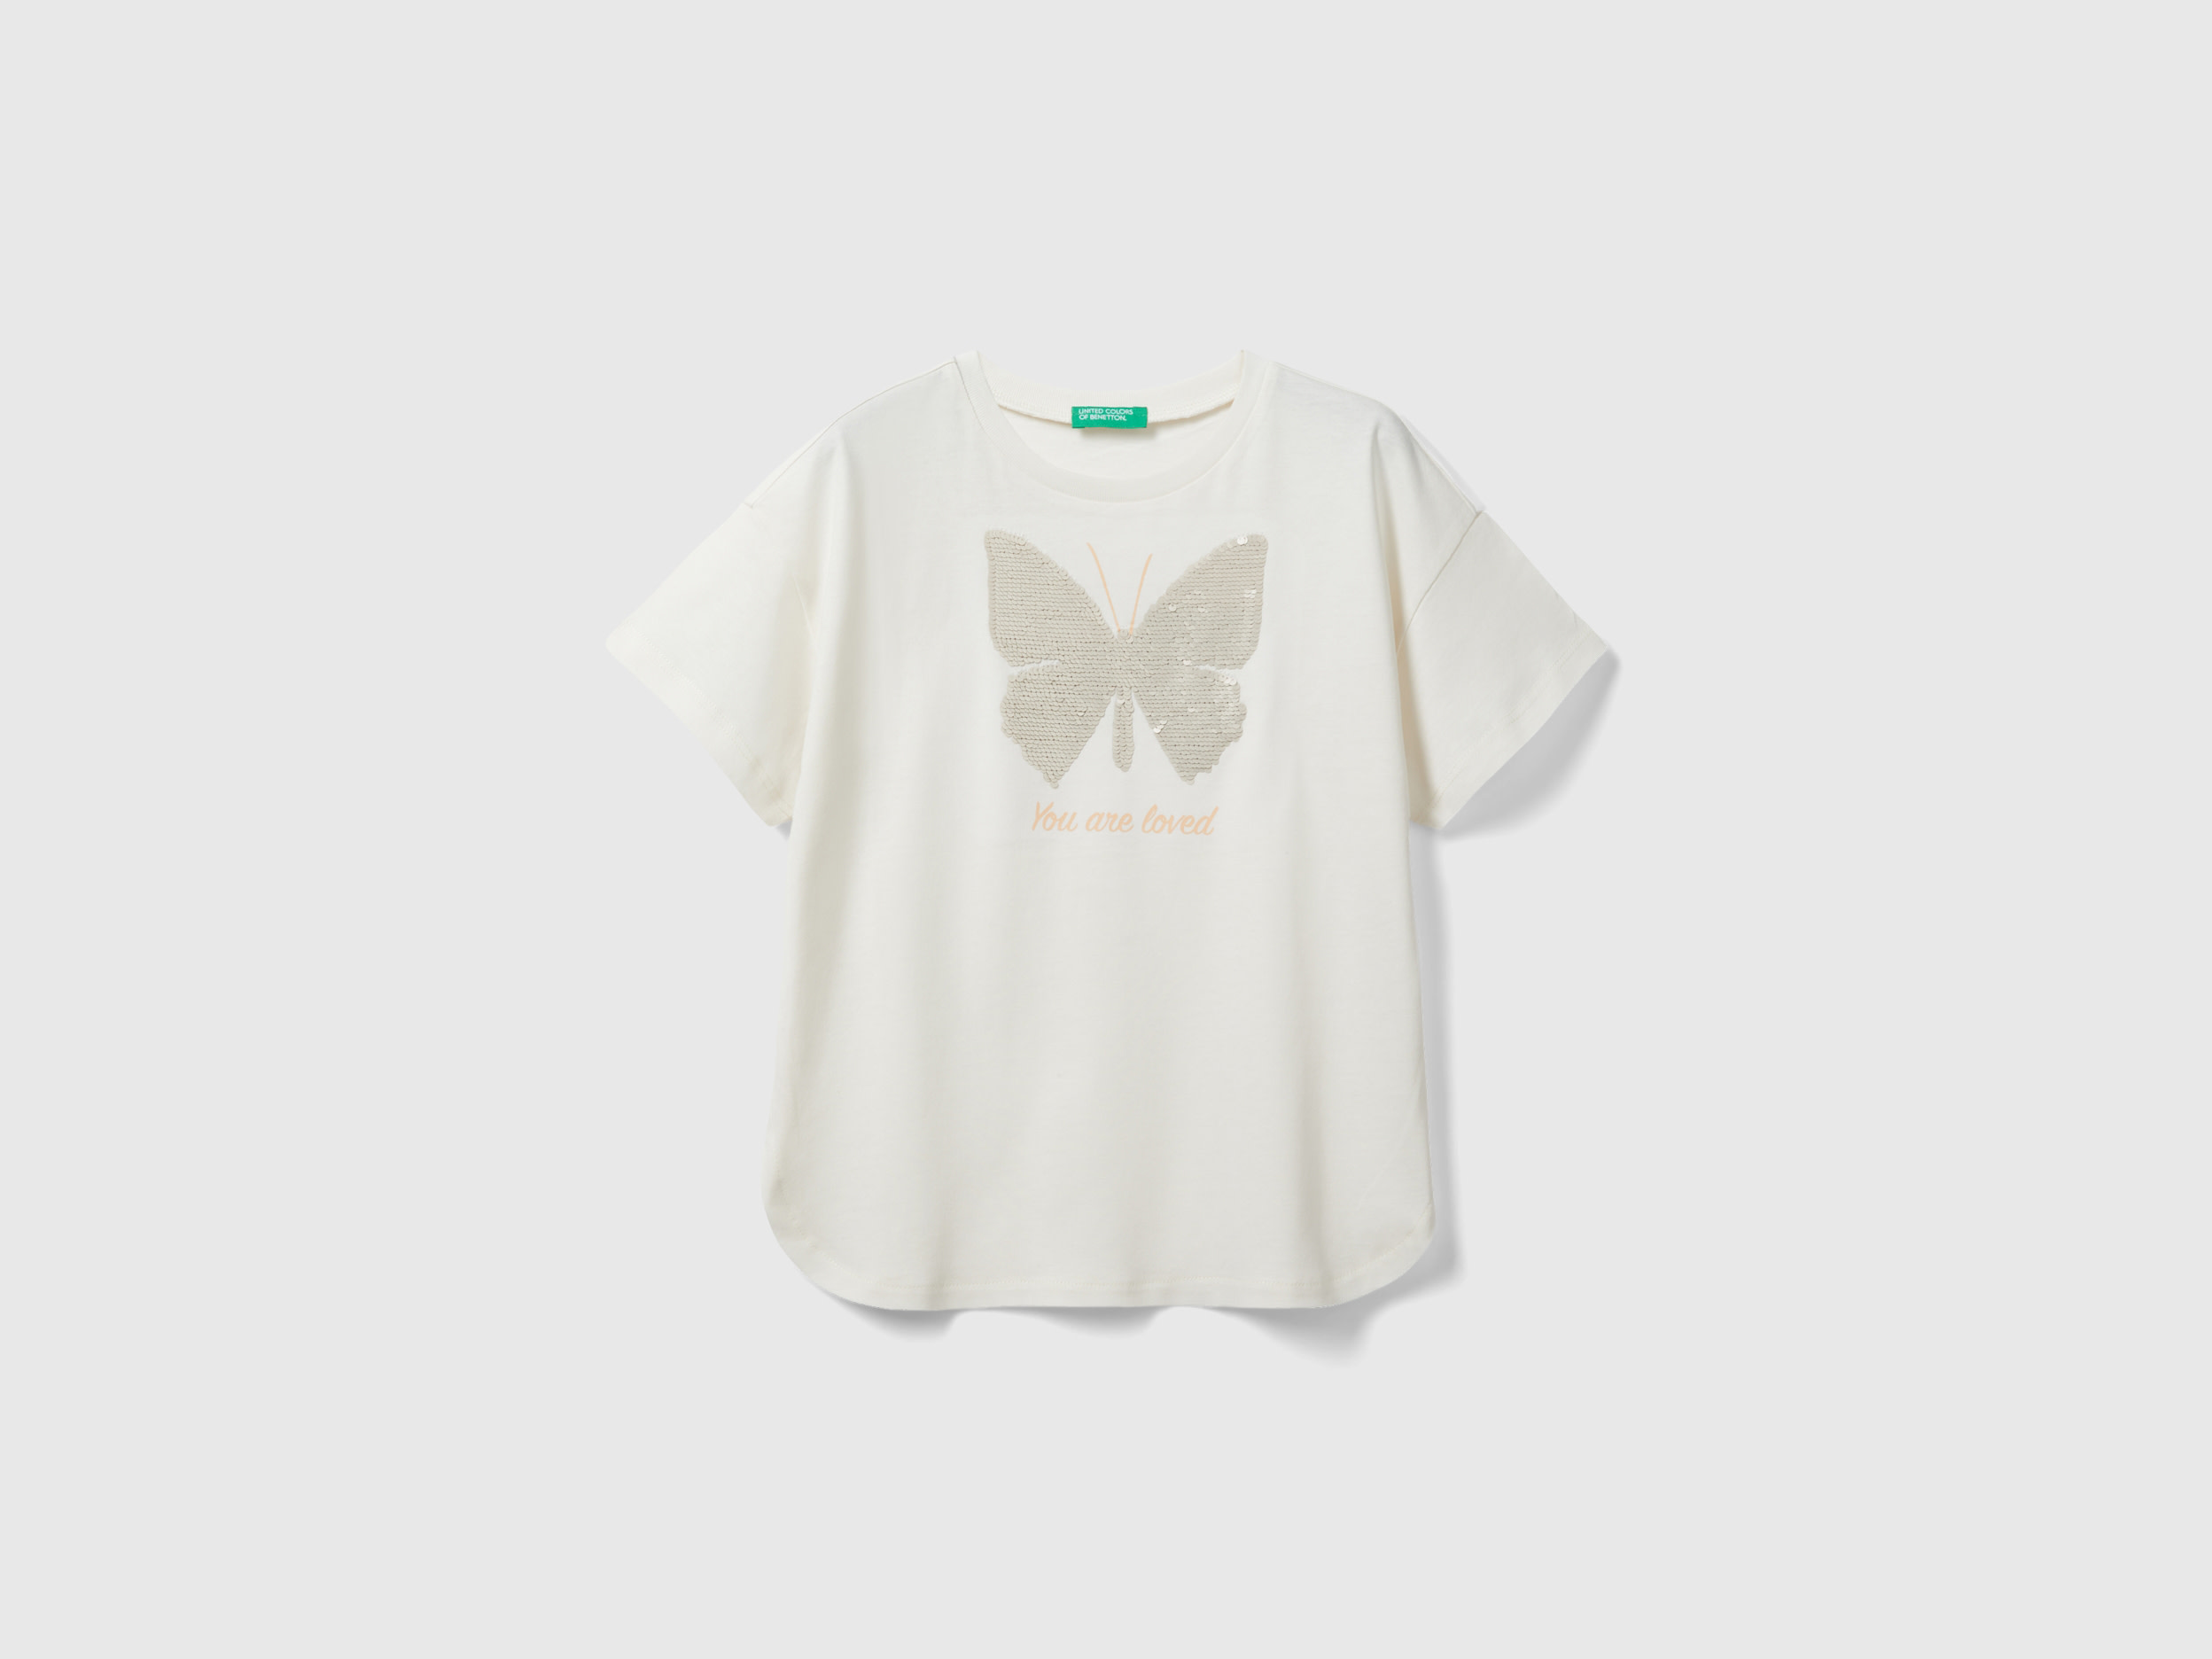 Image of Benetton, T-shirt With Reversible Sequins, size 2XL, Creamy White, Kids